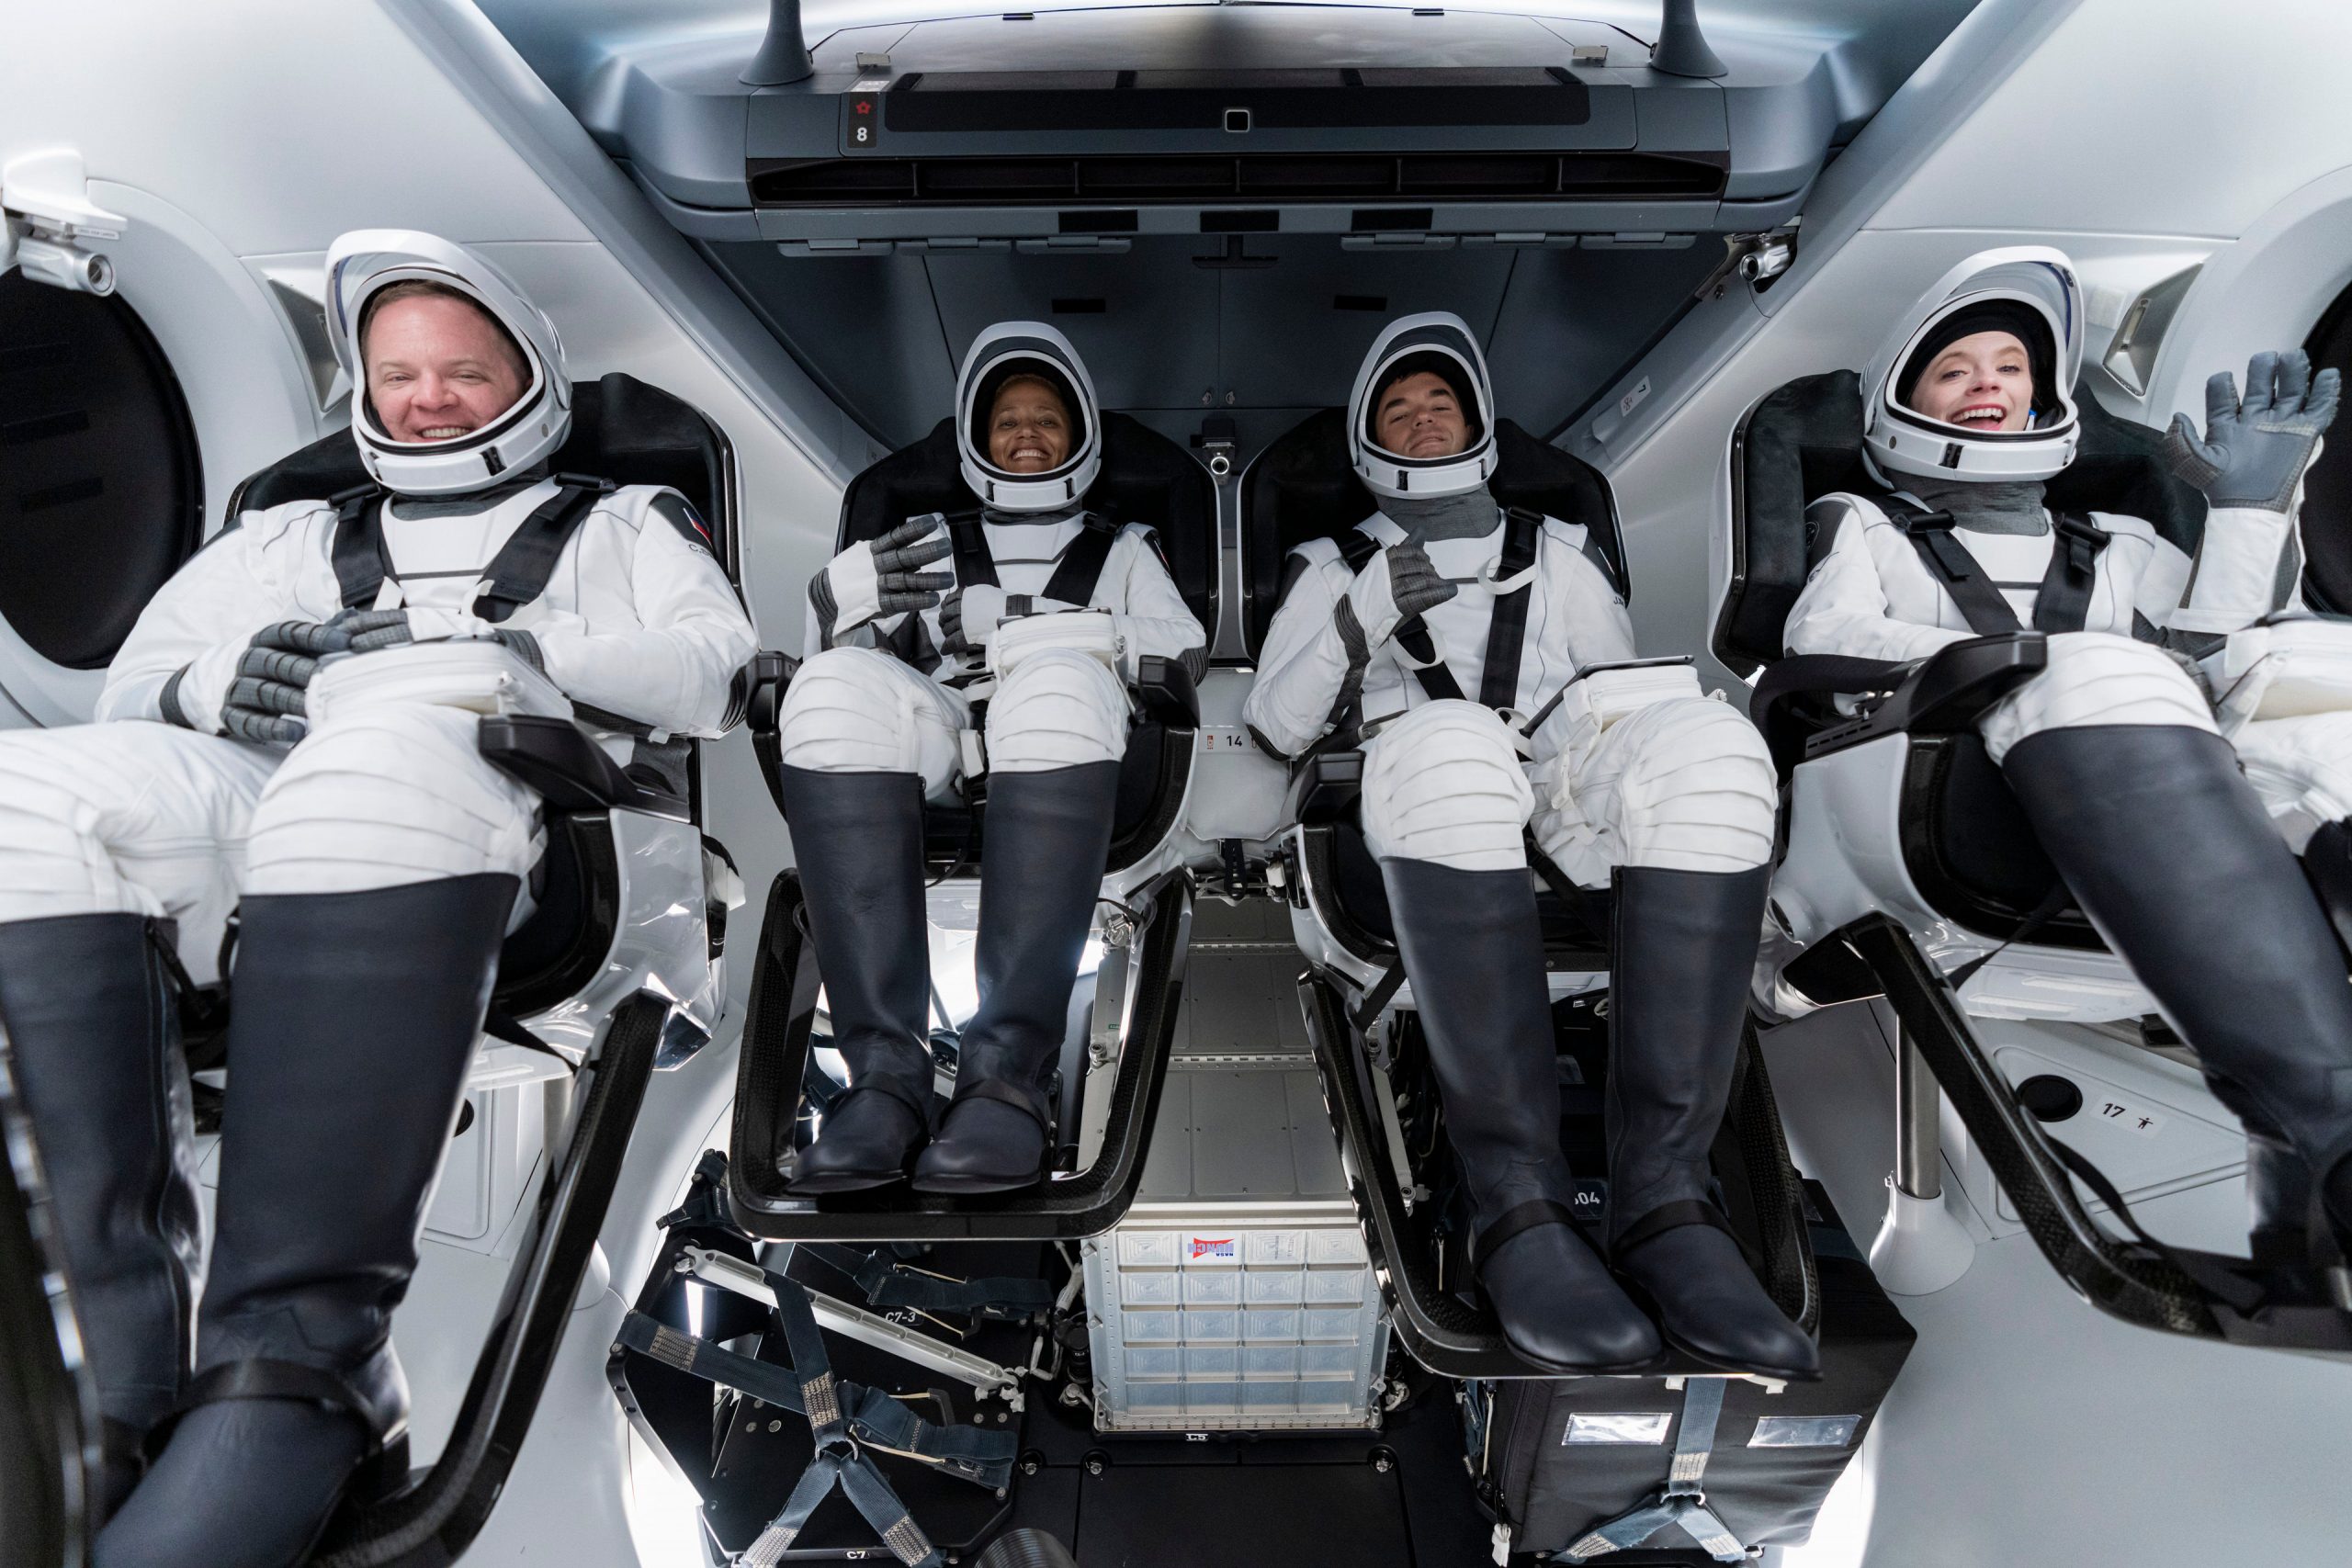 SpaceX launch: All about Inspiration4’s civilian crew